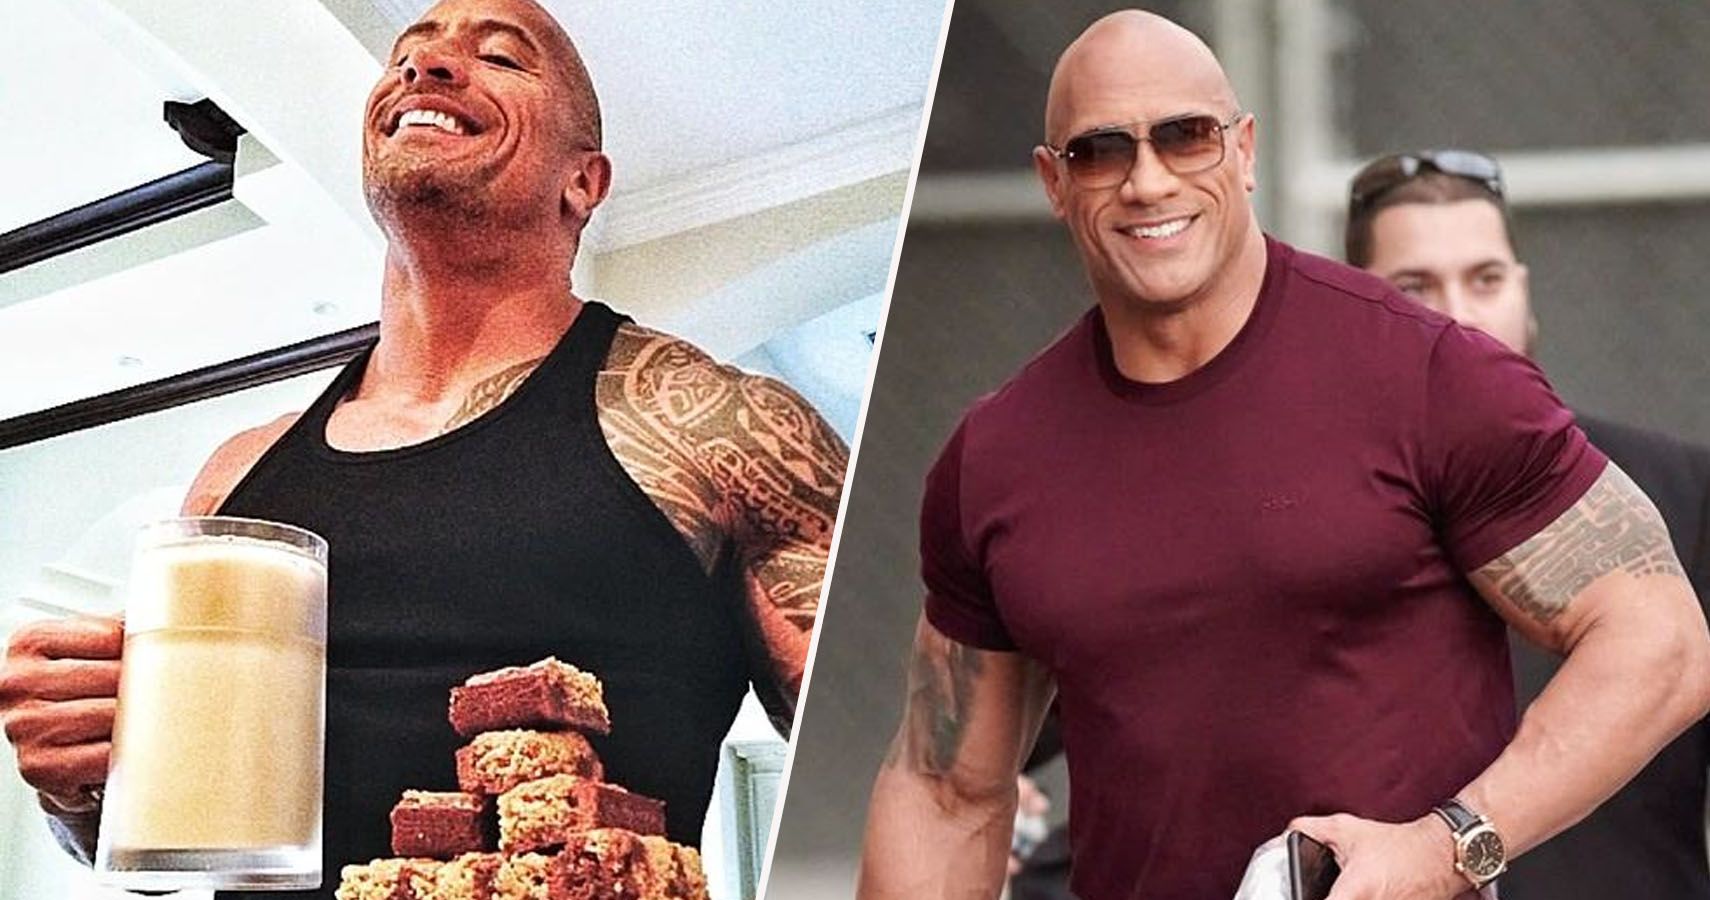 15 Things Dwayne The Rock Johnson Does To Stay In Shape